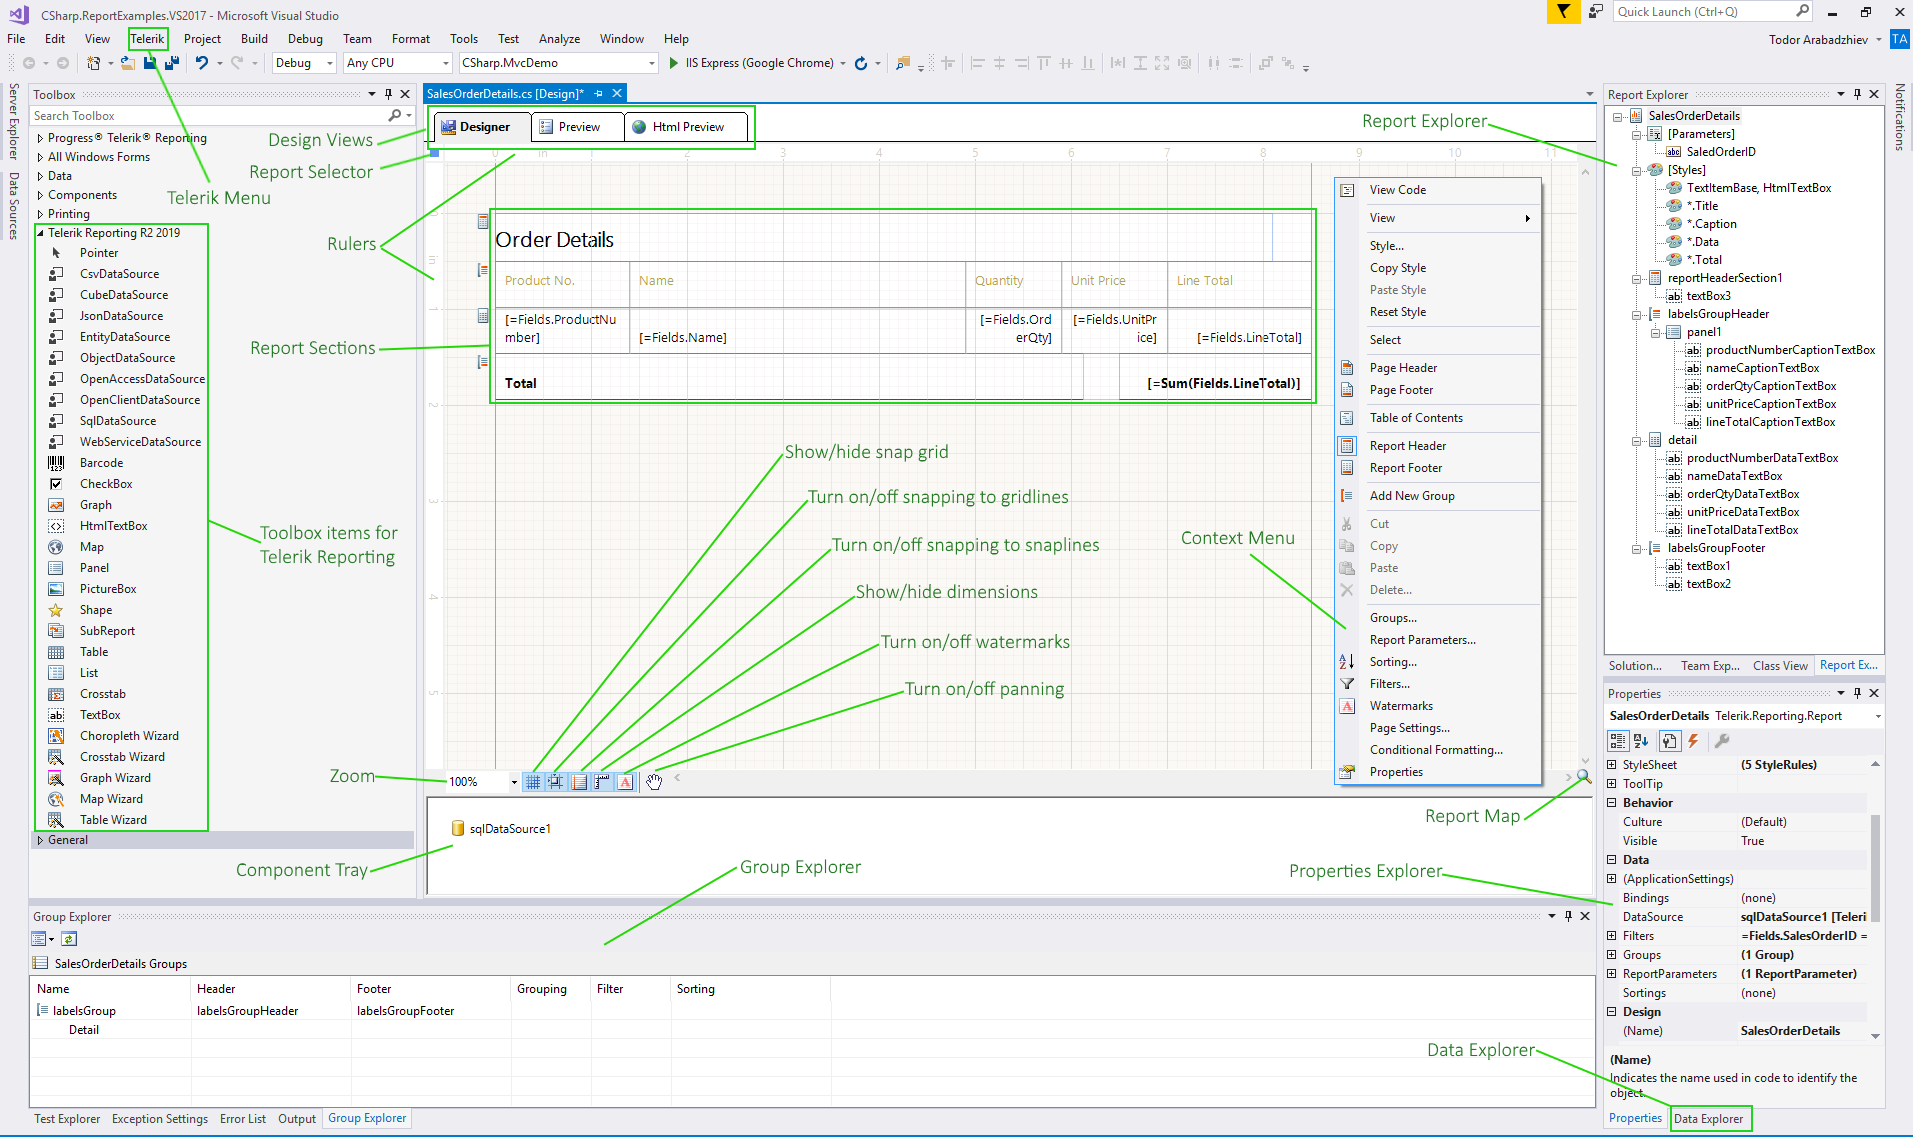 A preview of the Visual Studio Report Designer's main areas/functionalities